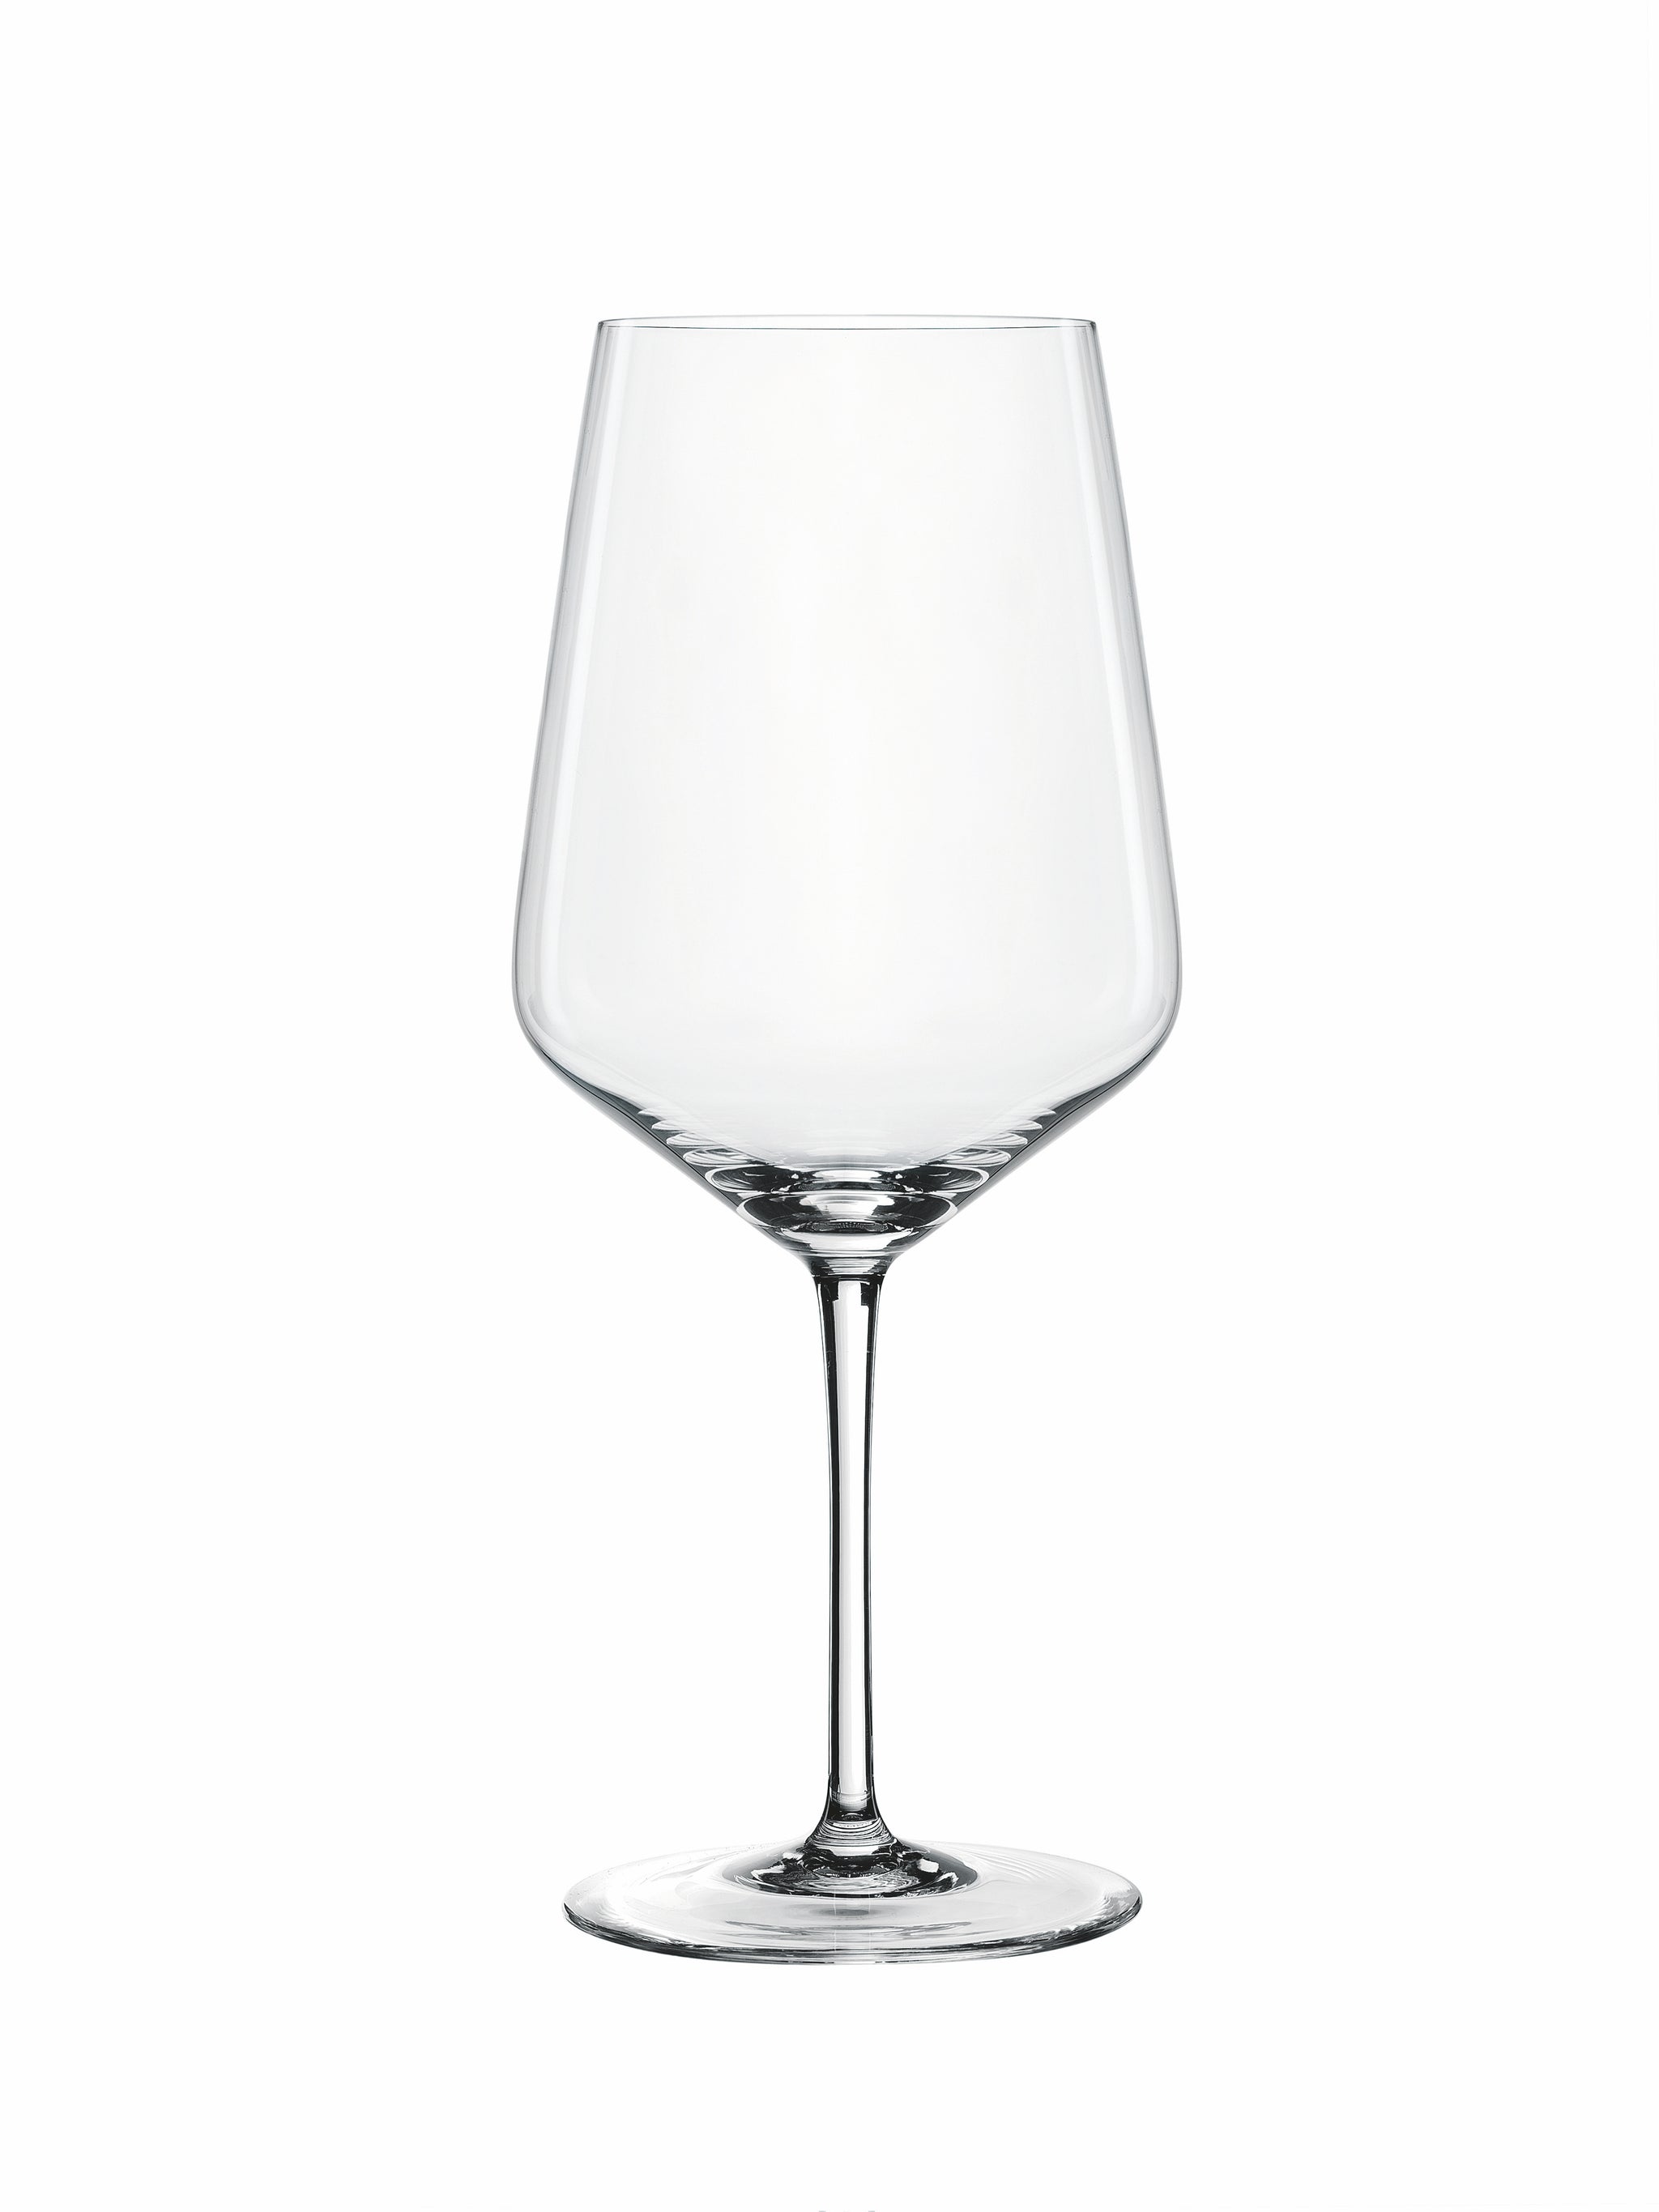 Spiegelau Style Red Wine Glasses, Set of 4